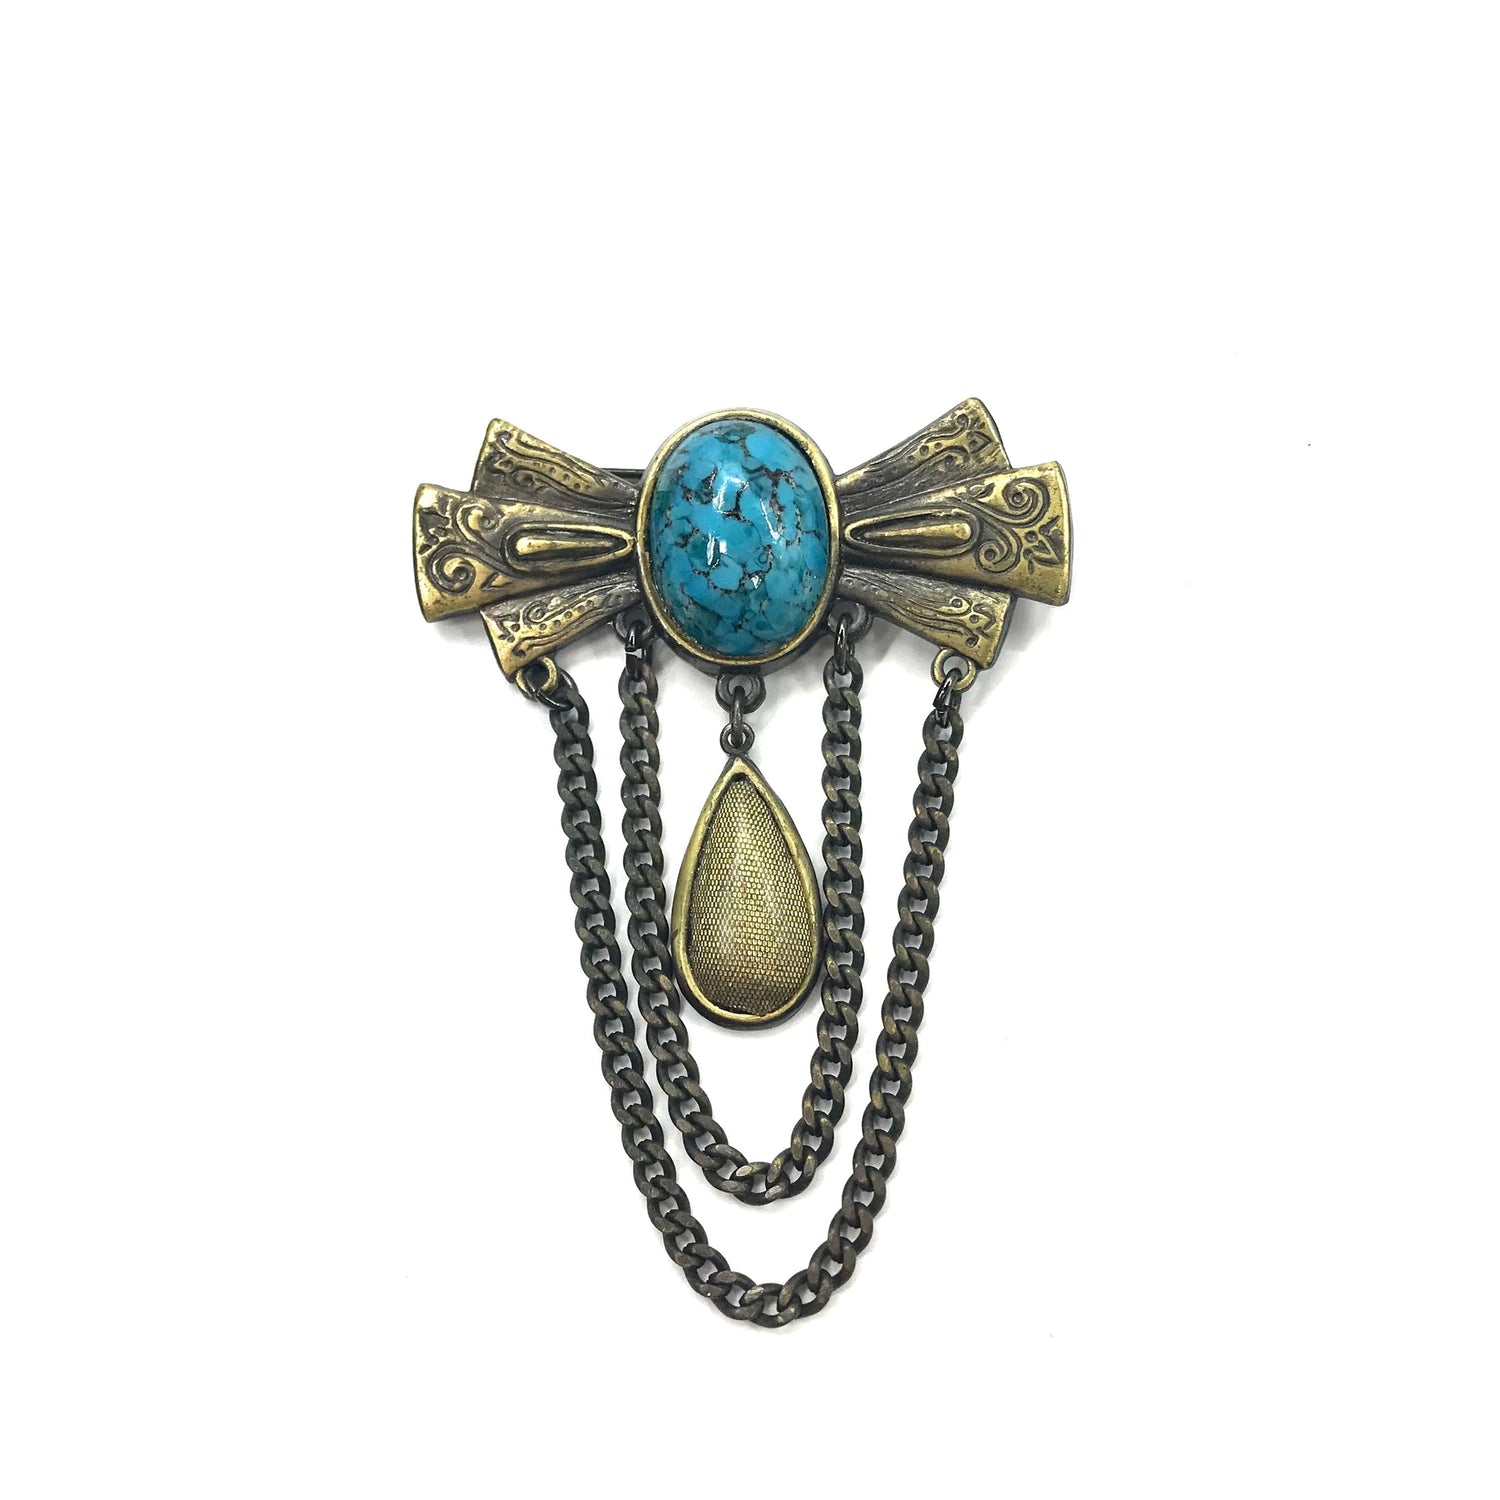 Vintage Turquoise Broach ヴィンテージ ターコイズ ブローチ ブルー 